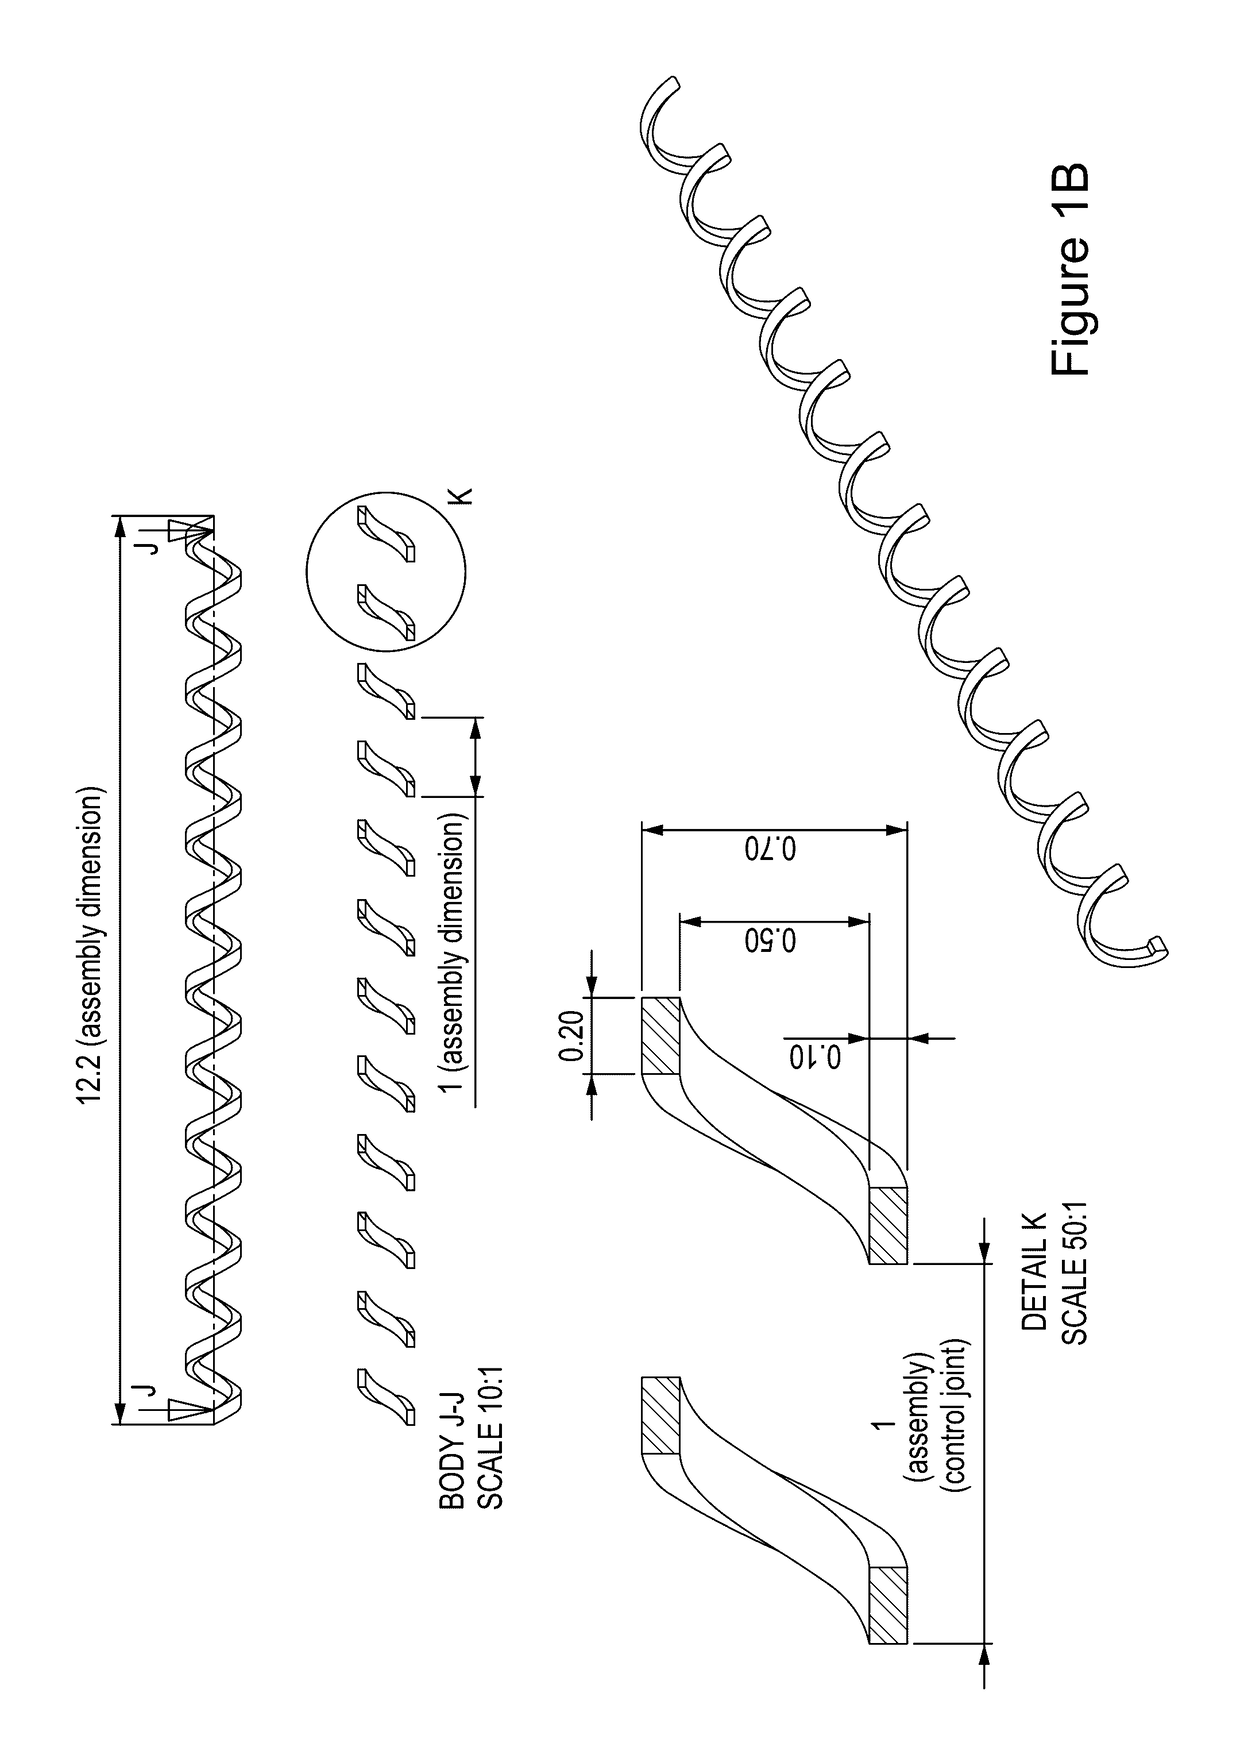 Vaccination with immuno-isolated cells producing an immunomodulator